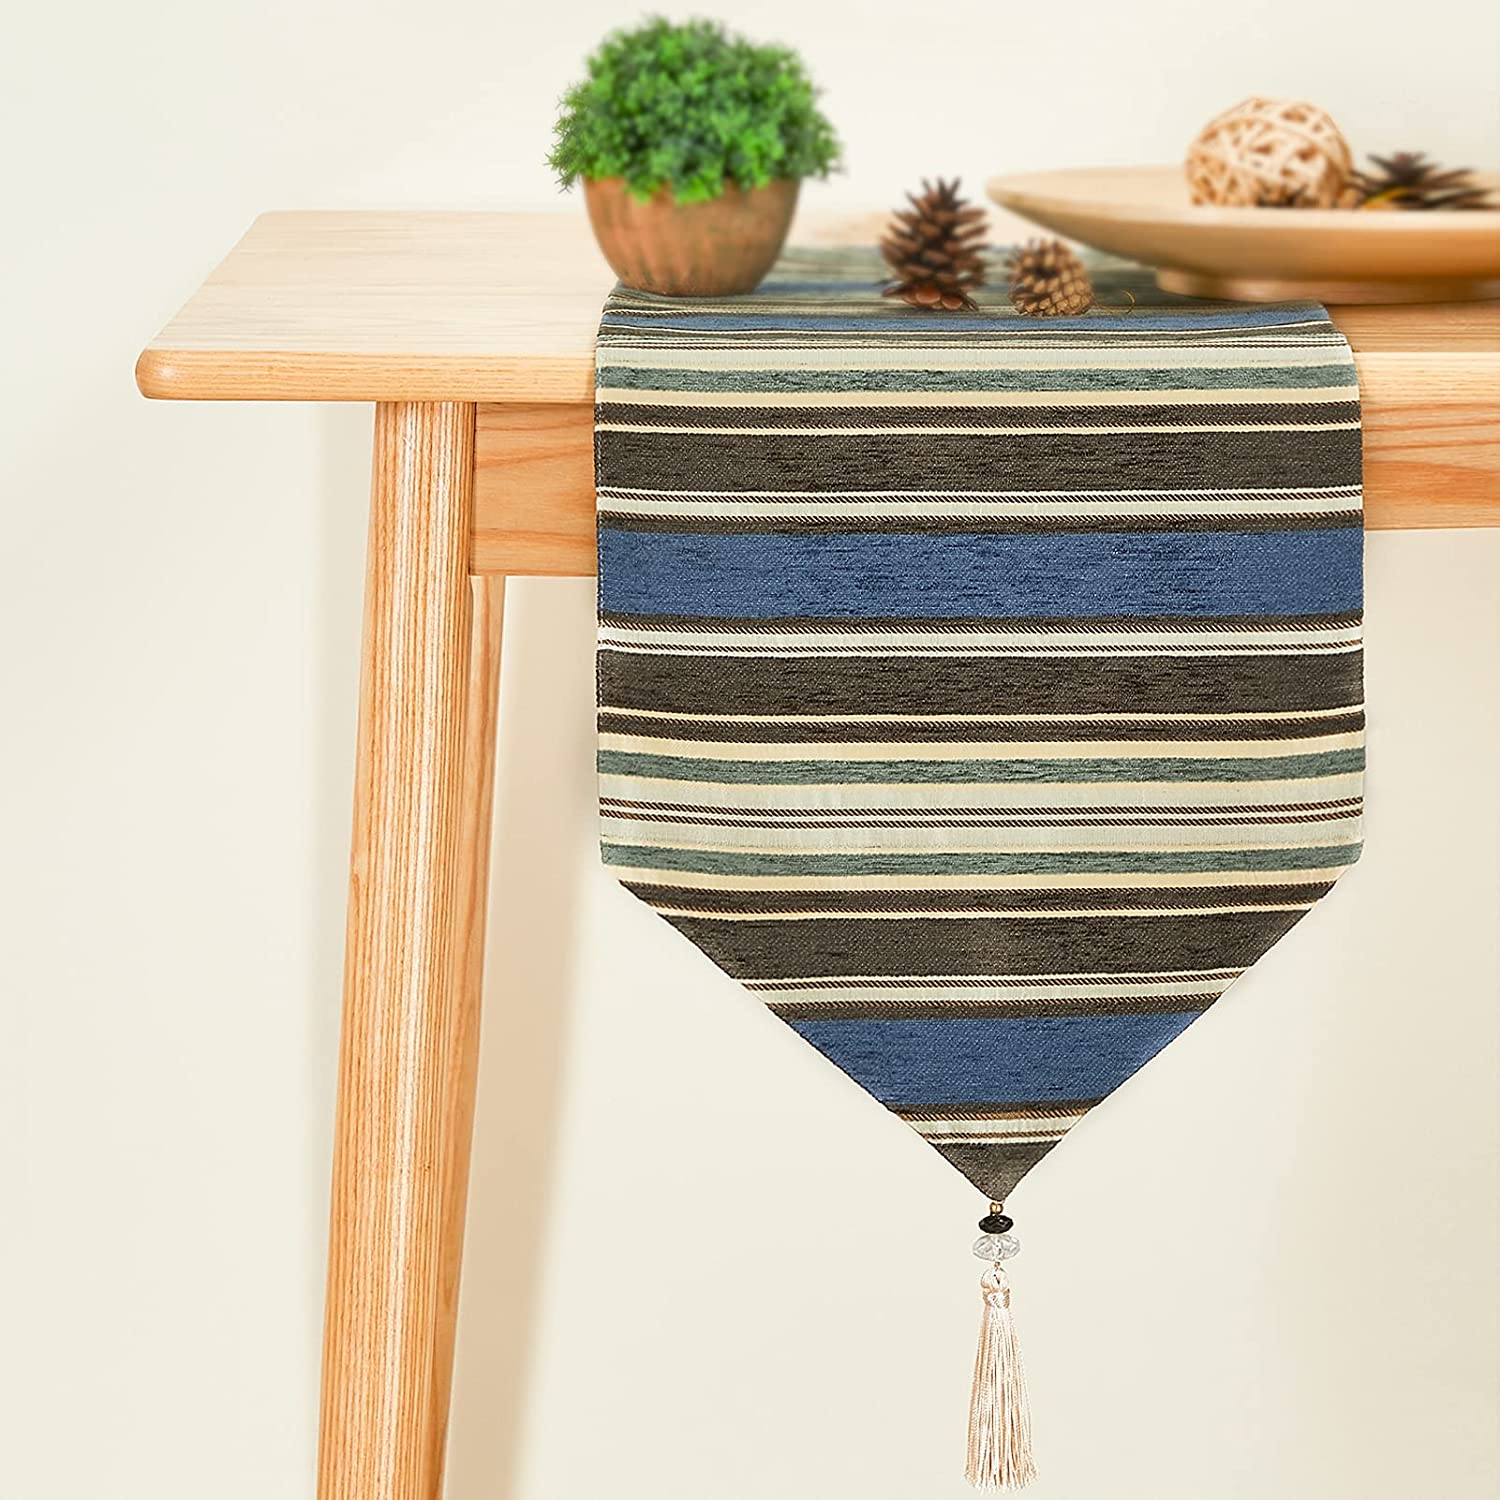 Farmhouse Striped Boho Table Runner with Tassels